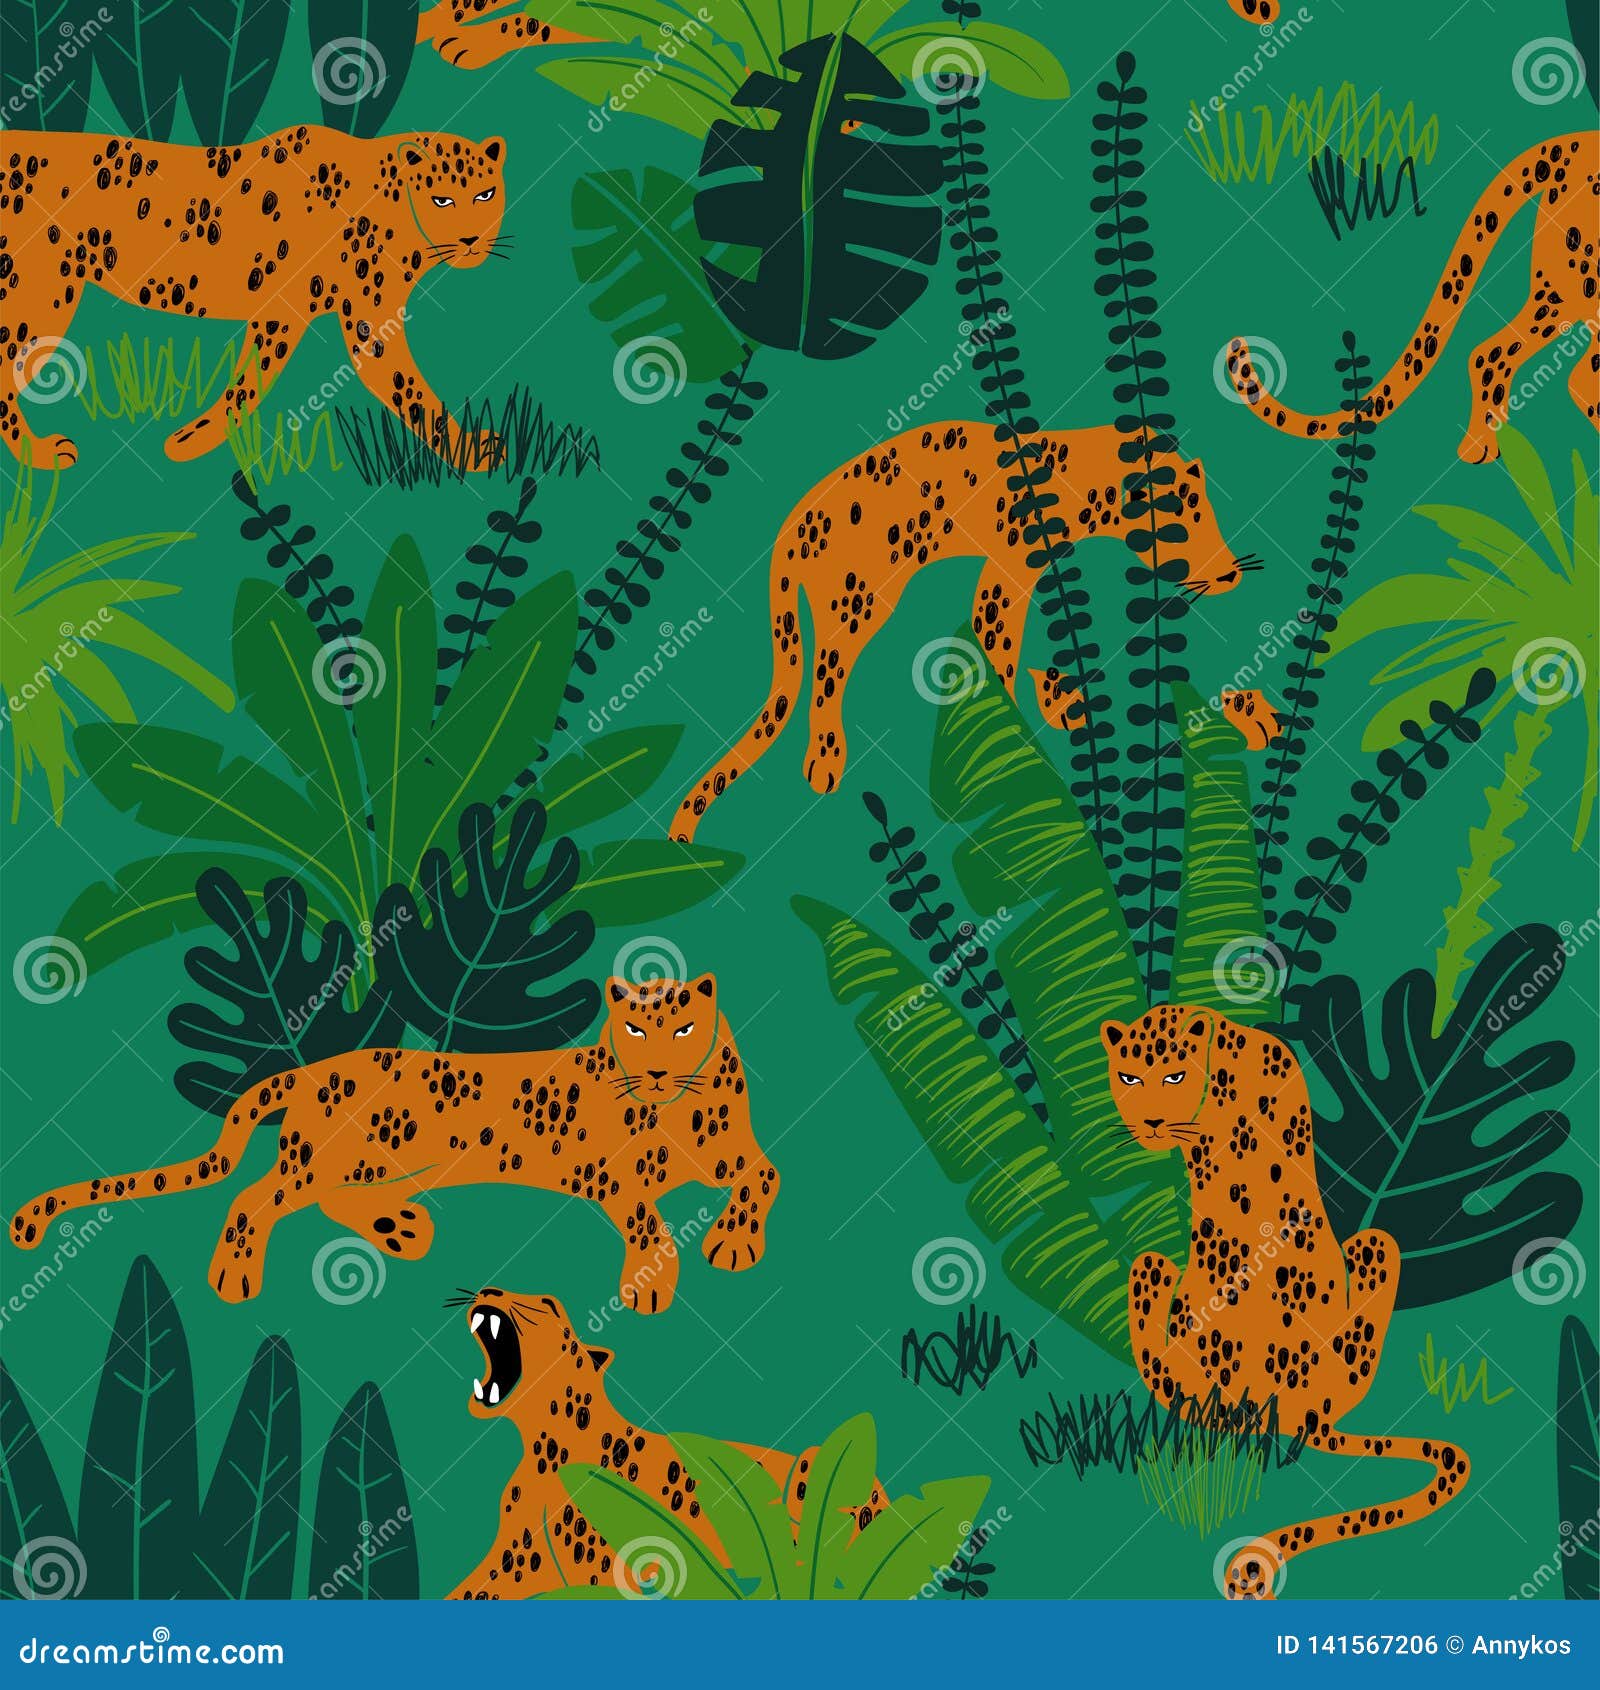 Leopard in Jungle Seamless Pattern Stock Vector - Illustration of ...